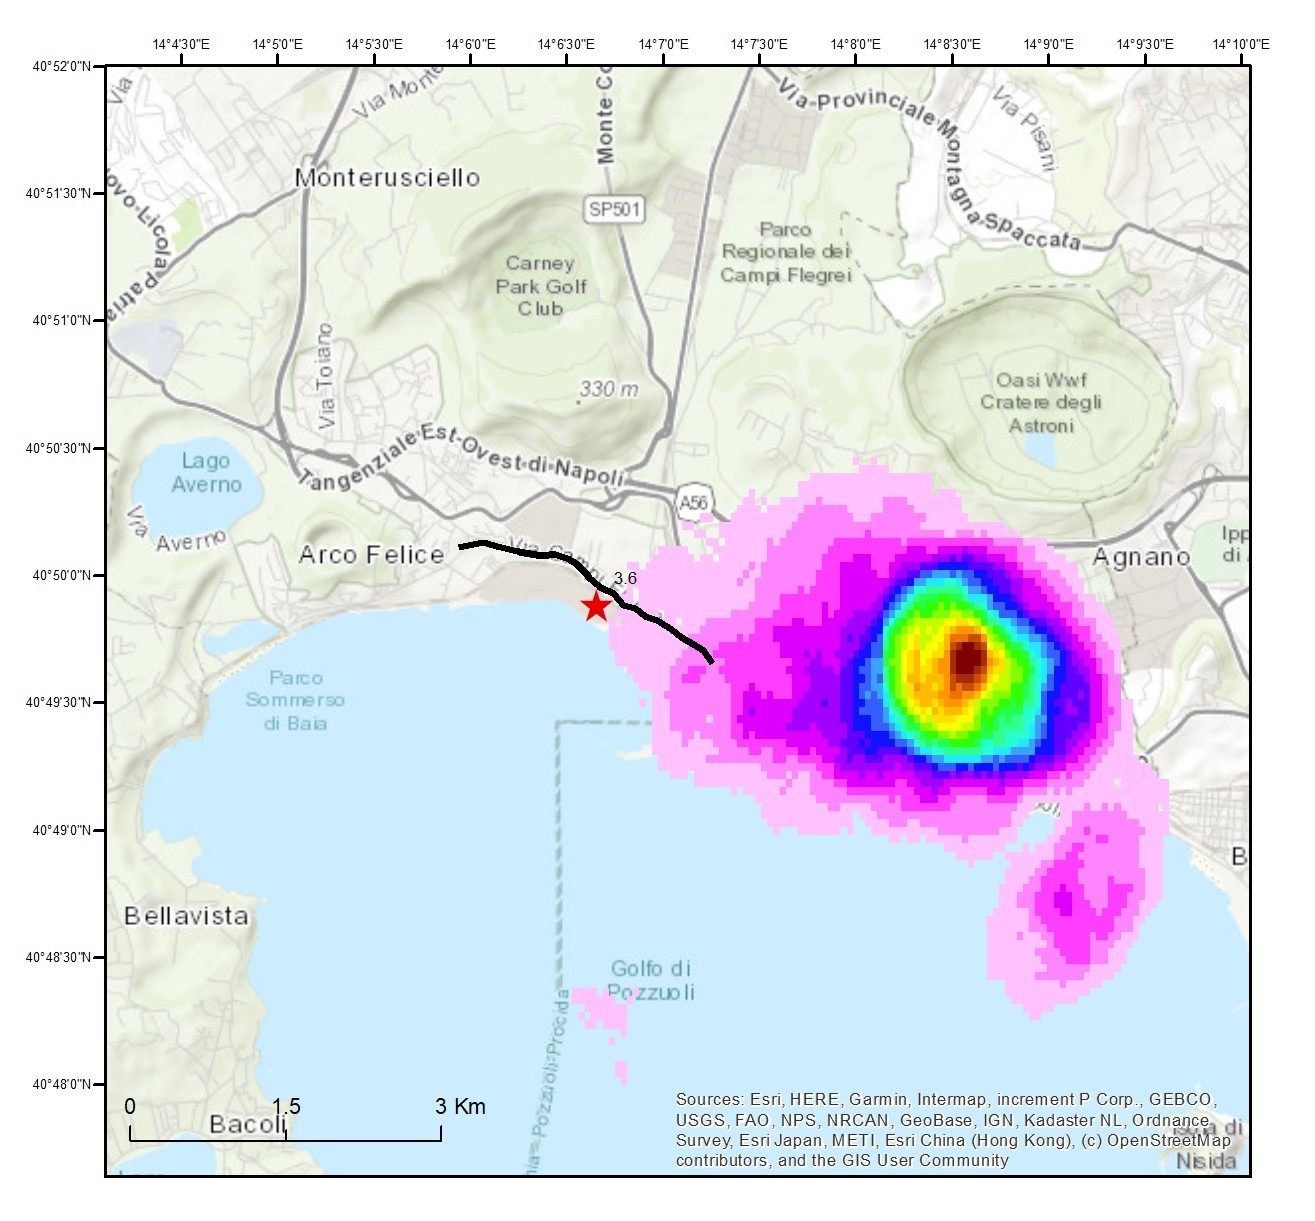 Heat map of earthquake activity in the Campi Flegrei since 2018